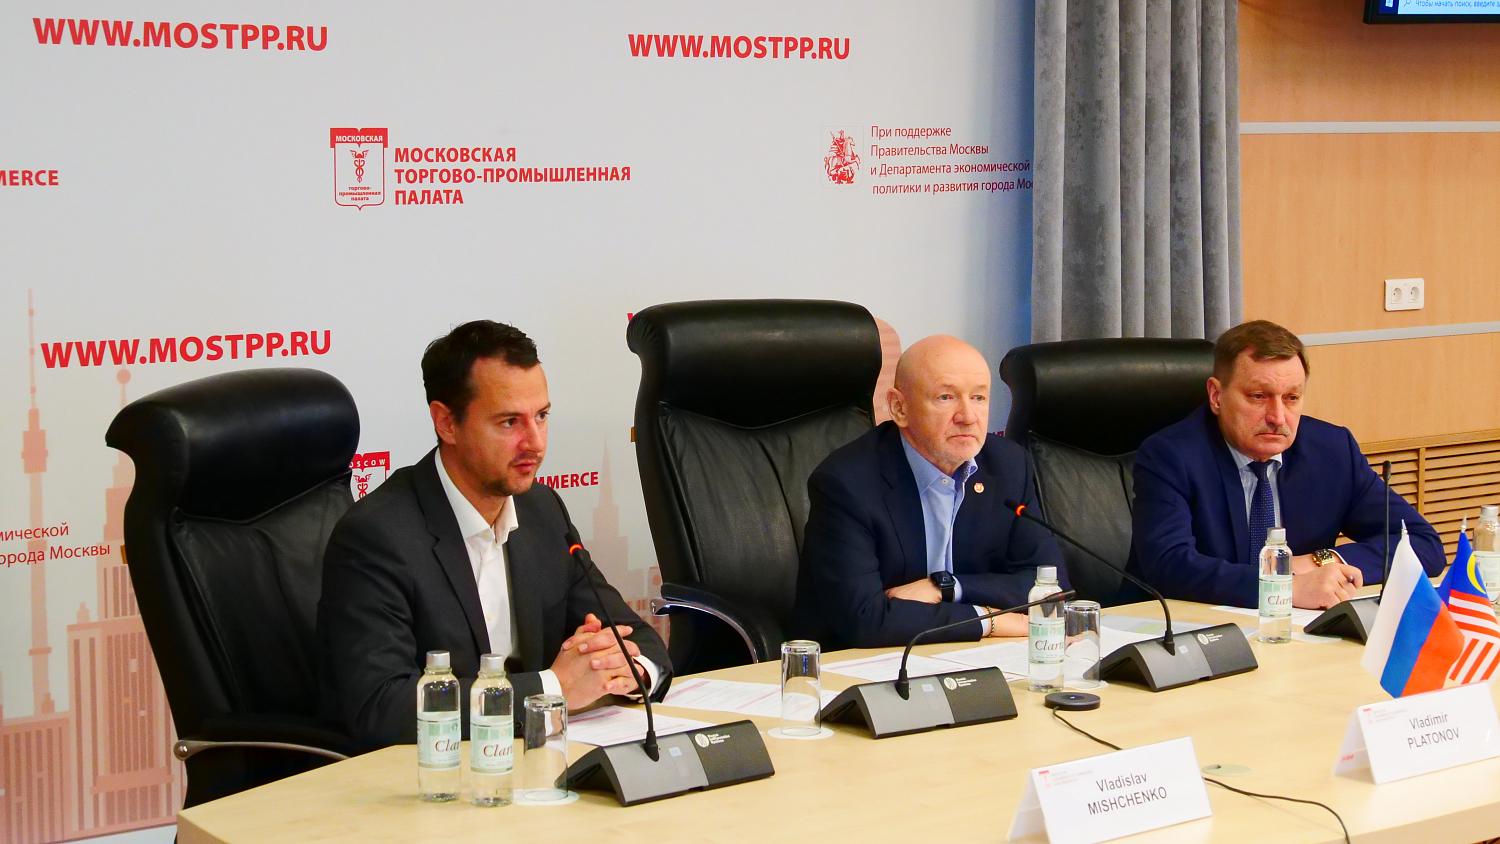 A virtual exhibition and presentation of Moscow companies in the field of the IT industry took place at the MTPP site